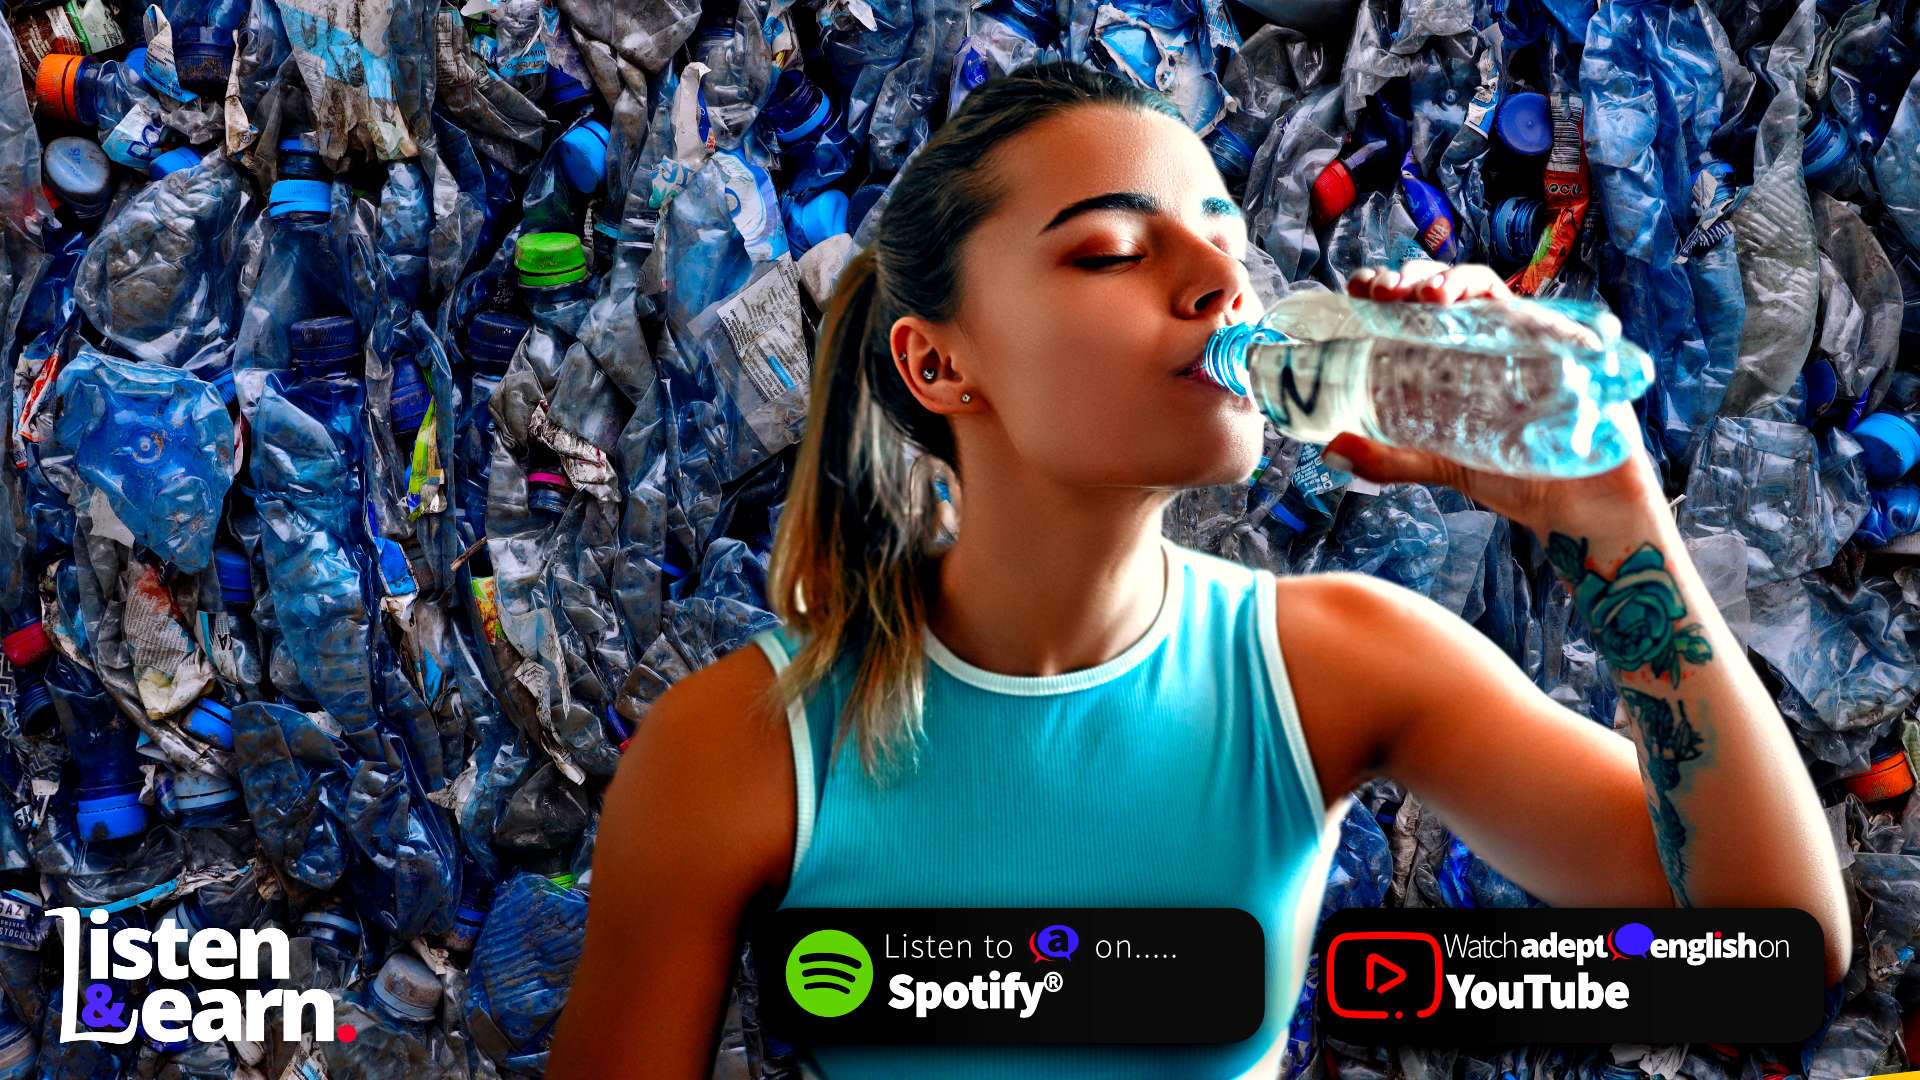 A beautiful woman drinking water from a plastic water bottle in front of a wall of used plastic bottles. Discover British English: Journey through English fluency while exploring pressing global issues.